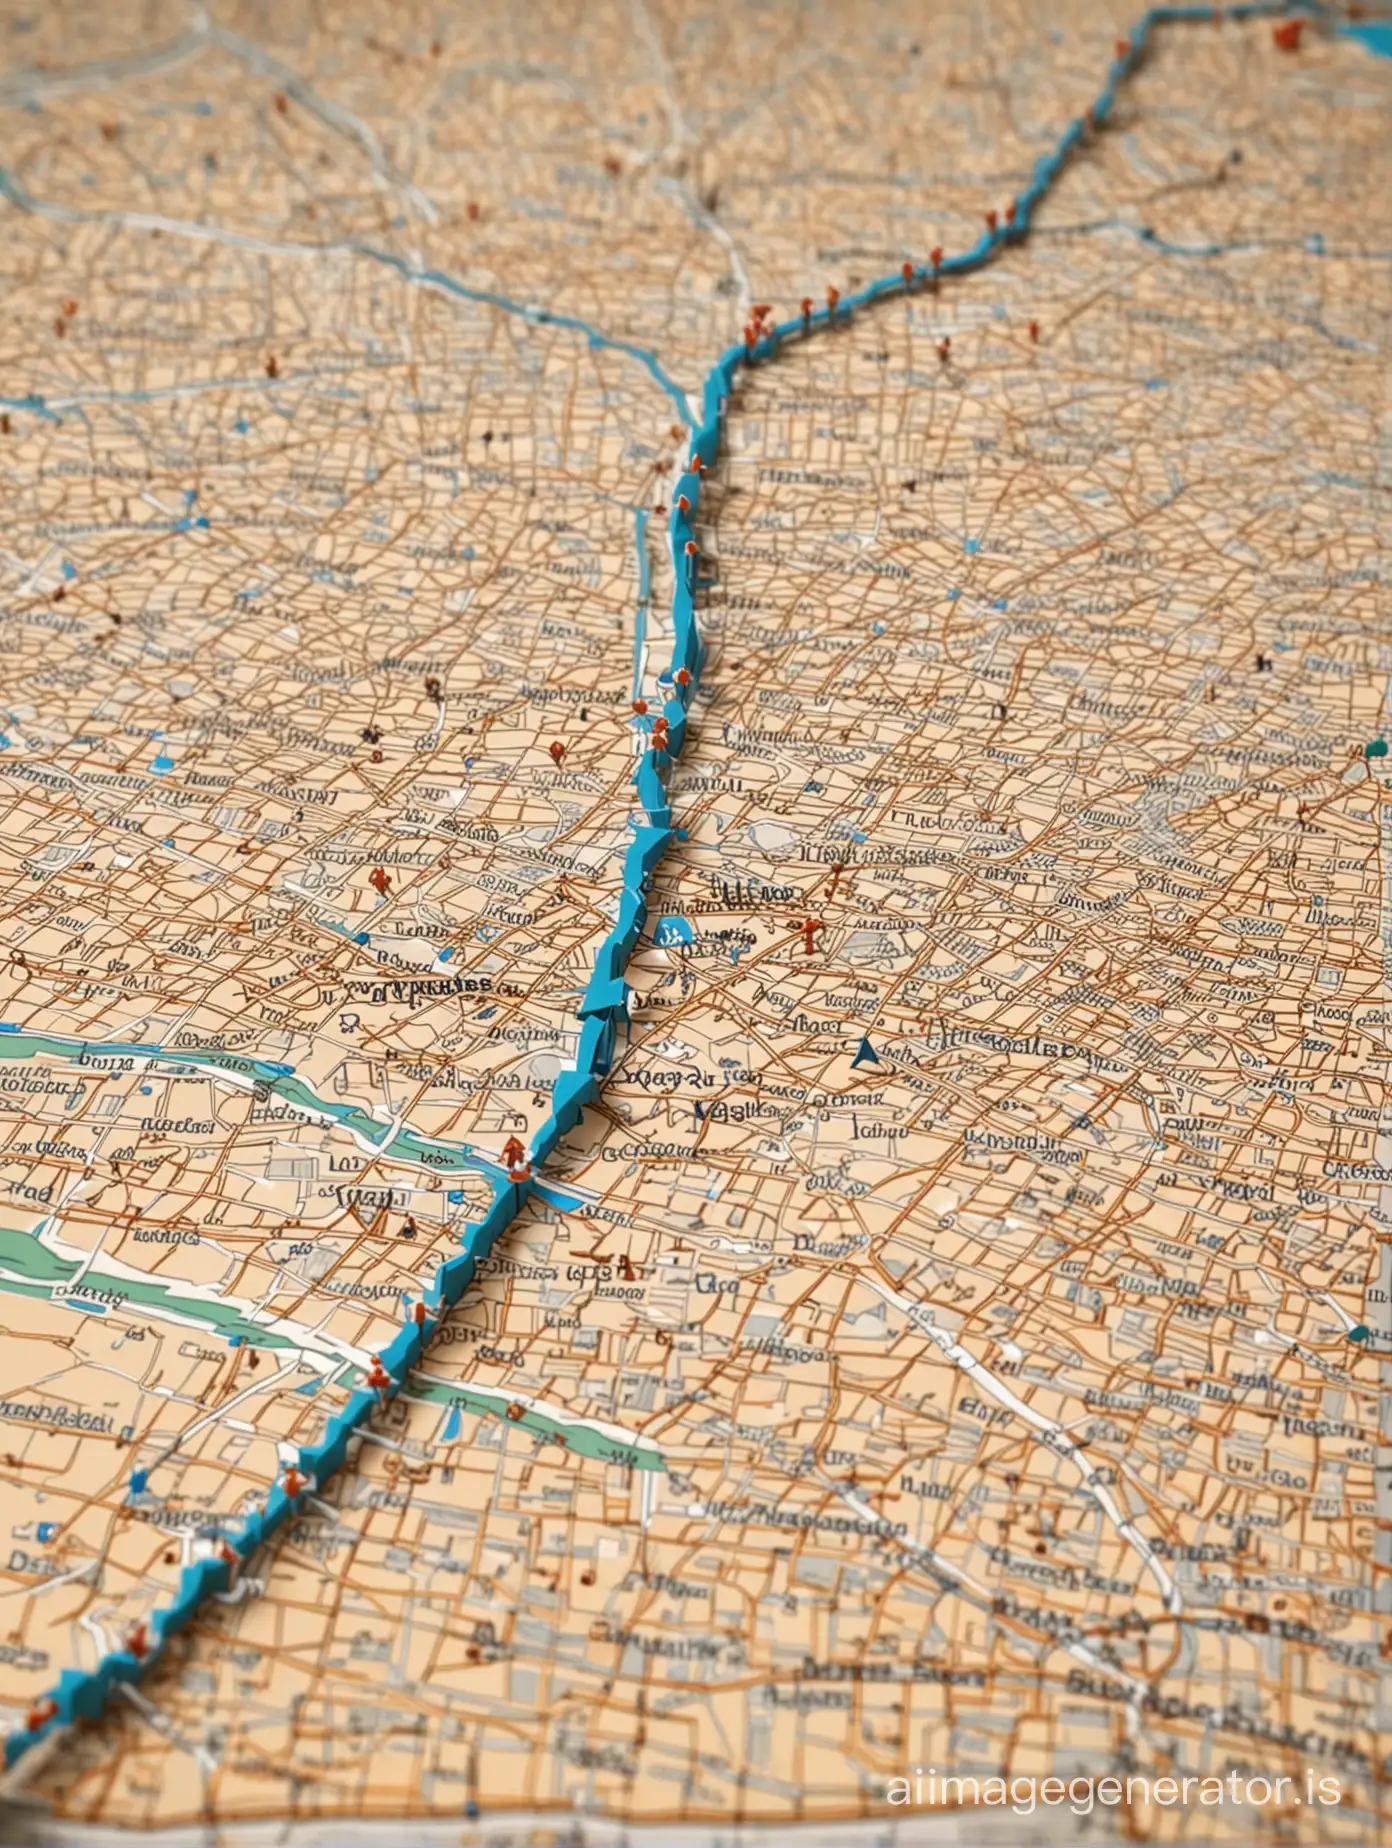 3D map with arrows showing distance between New York and Los Angeles